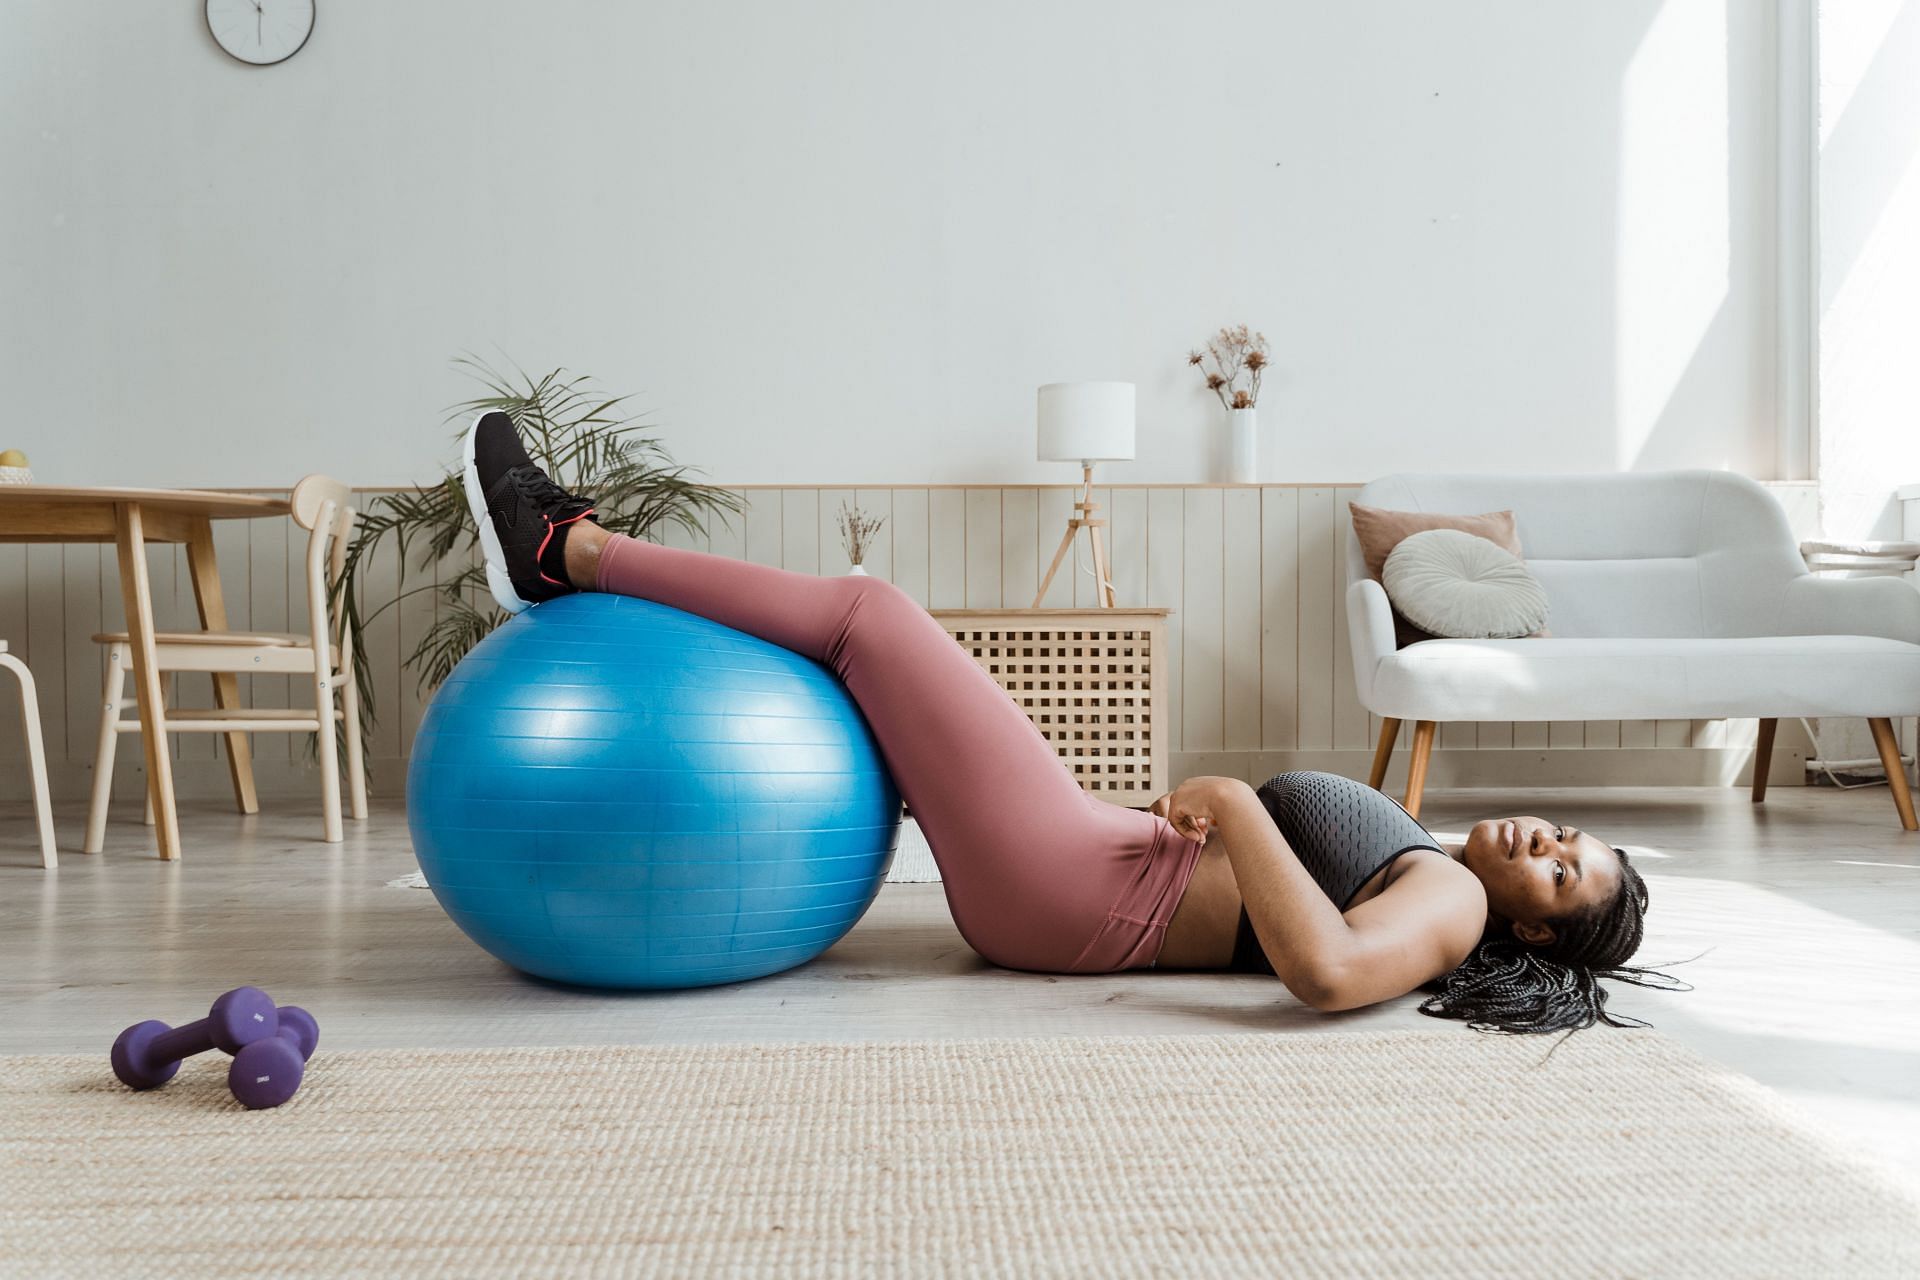 Glute bridge exercise helps in glute activation. (Image via Pexels/ Mart Production)